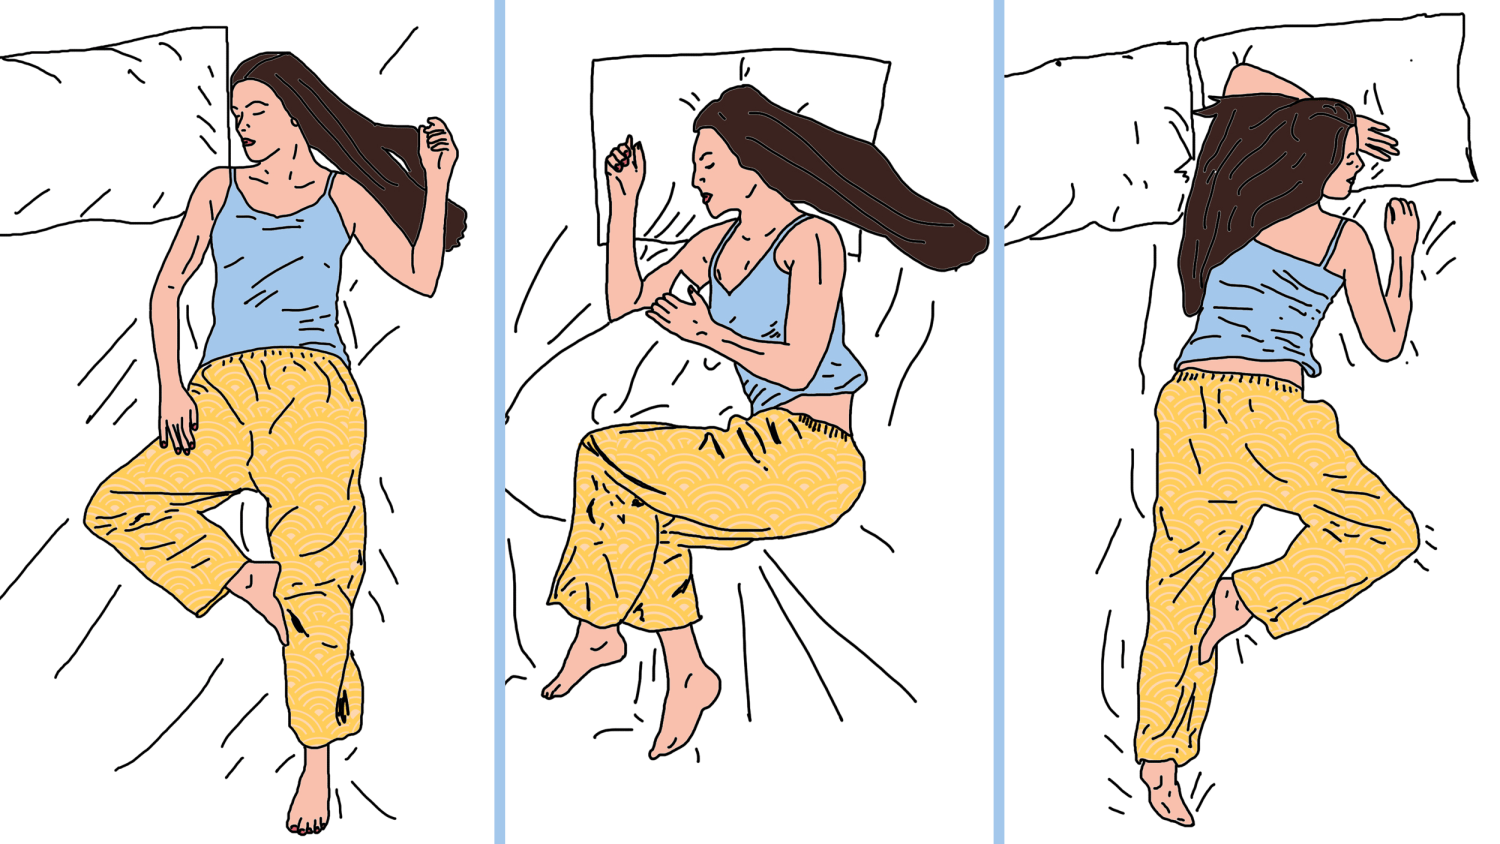 Is there a wrong sleeping position? Can it take a toll on the spine? - Quora